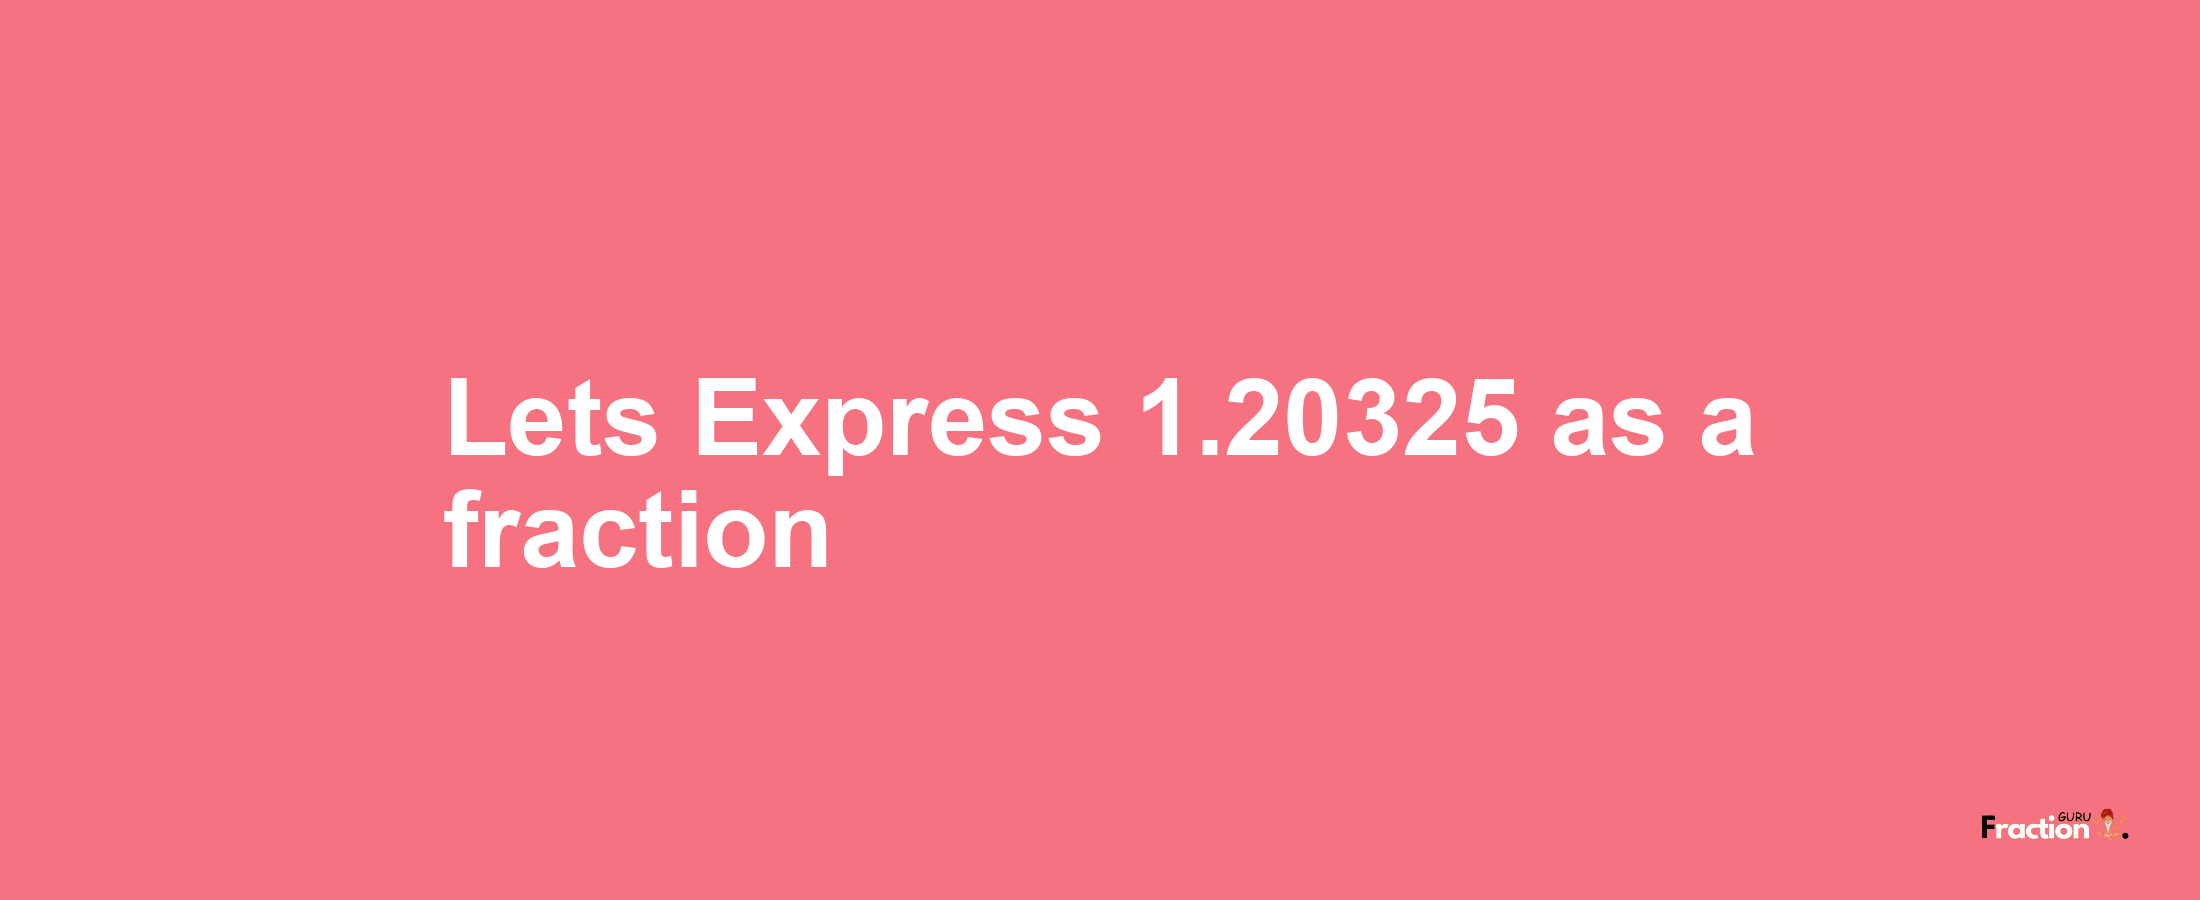 Lets Express 1.20325 as afraction